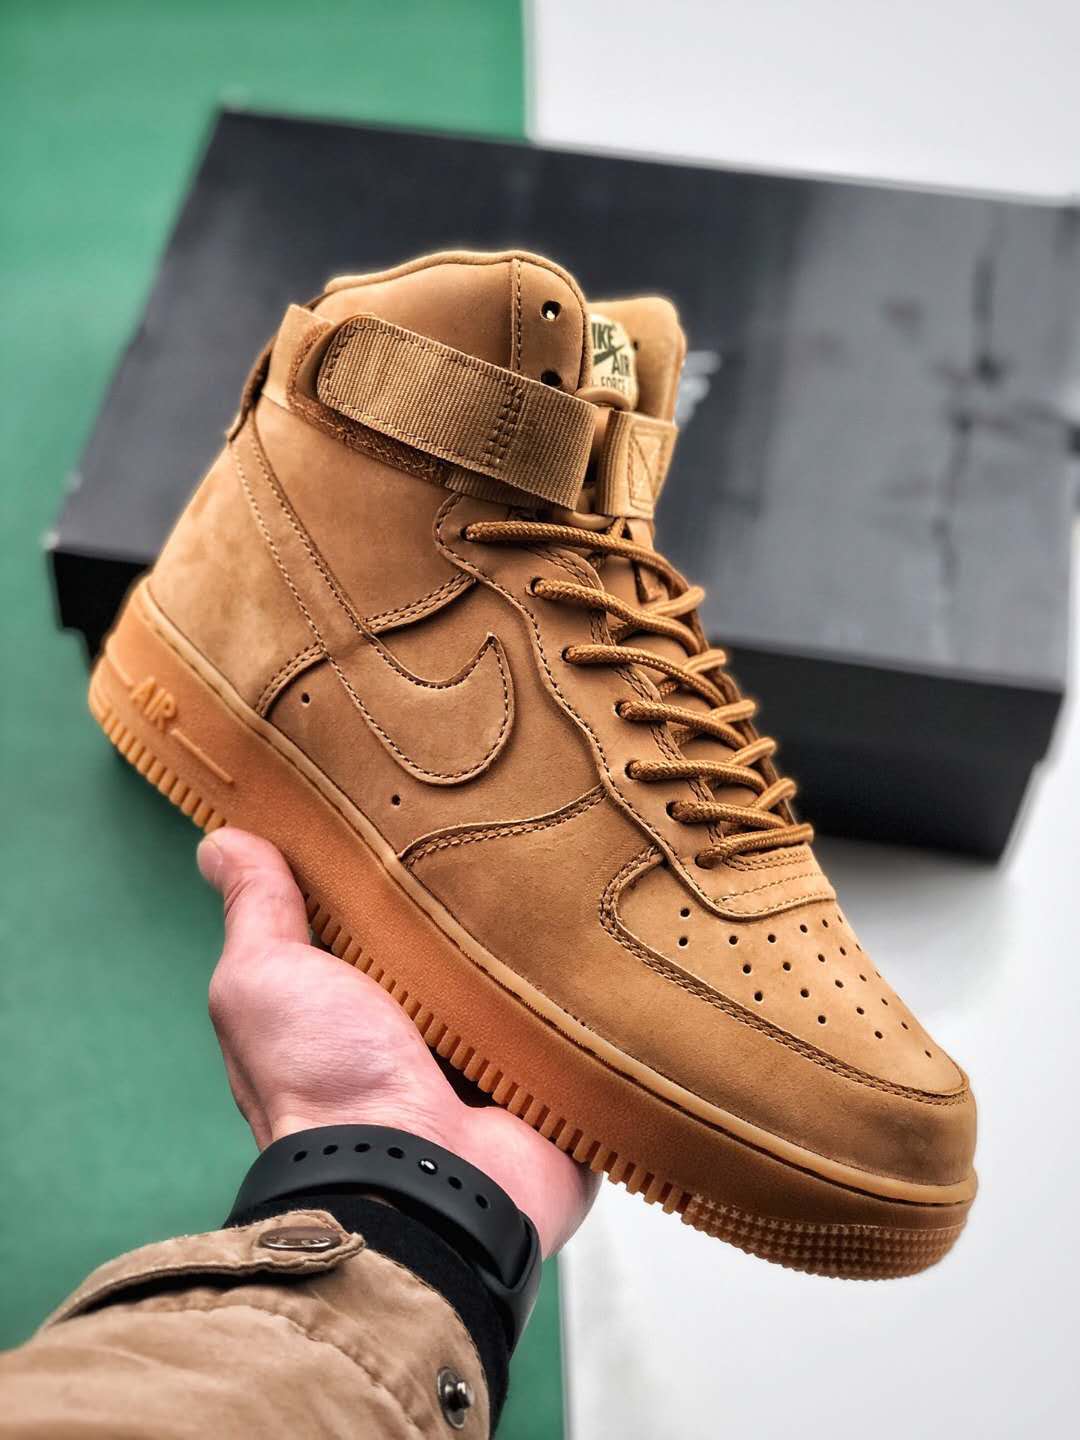 Nike Air Force 1 High Flax 882096-200 - Shop the Classic and Timeless Sneaker